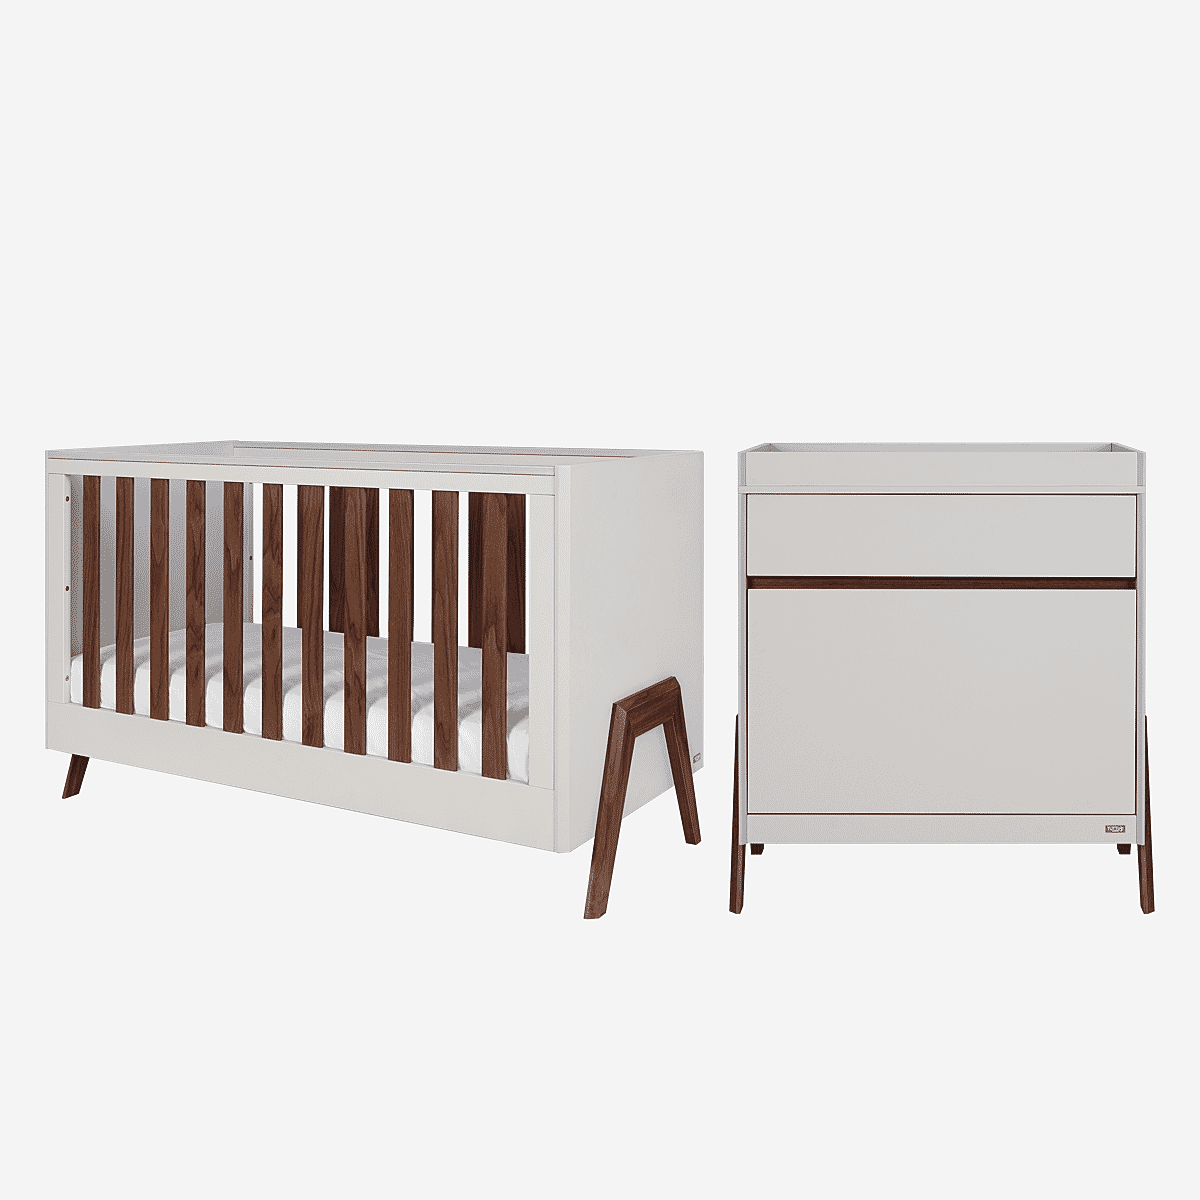 Tutti Bambini Fuori 2pc Room Set - White Sand/Warm Walnut - For Your Little One